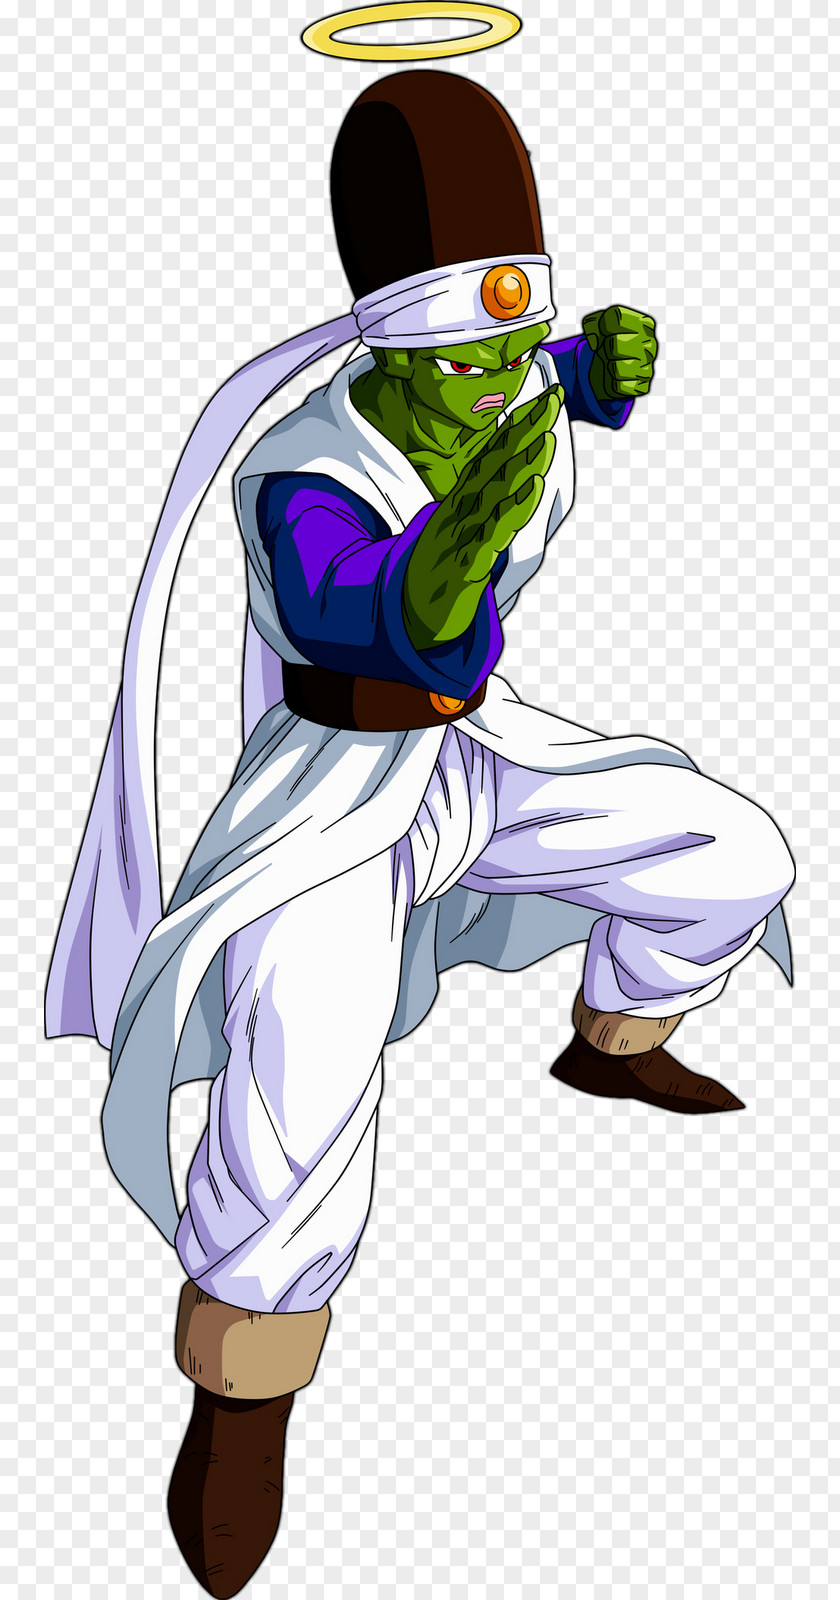 Bruce Lee Dragon Ball FighterZ Pikkon Goku Piccolo PNG